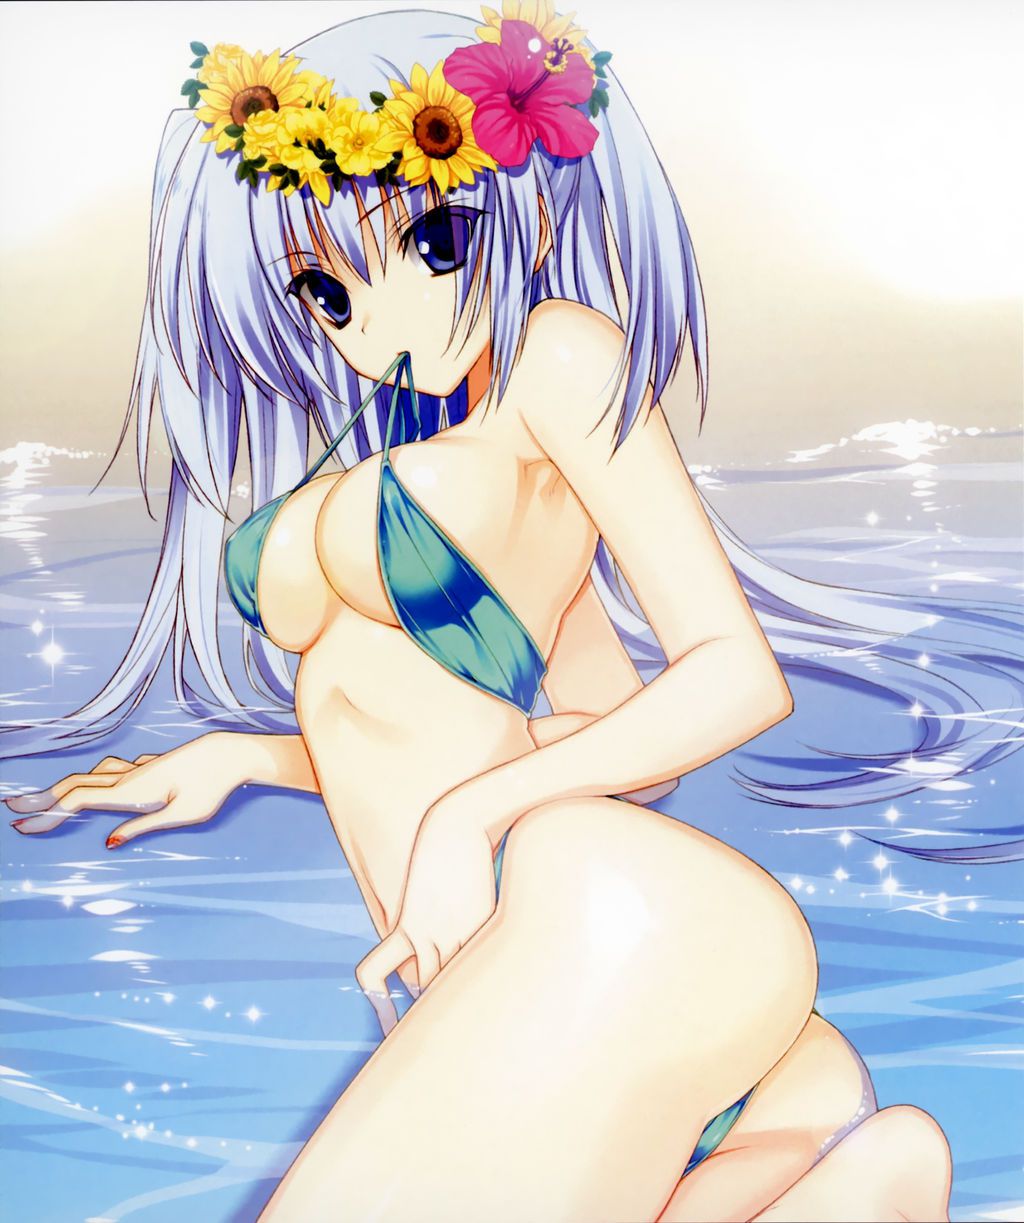 [Secondary swimsuit] dazzling smooth skin, beautiful girl image of swimsuit Part 7 13